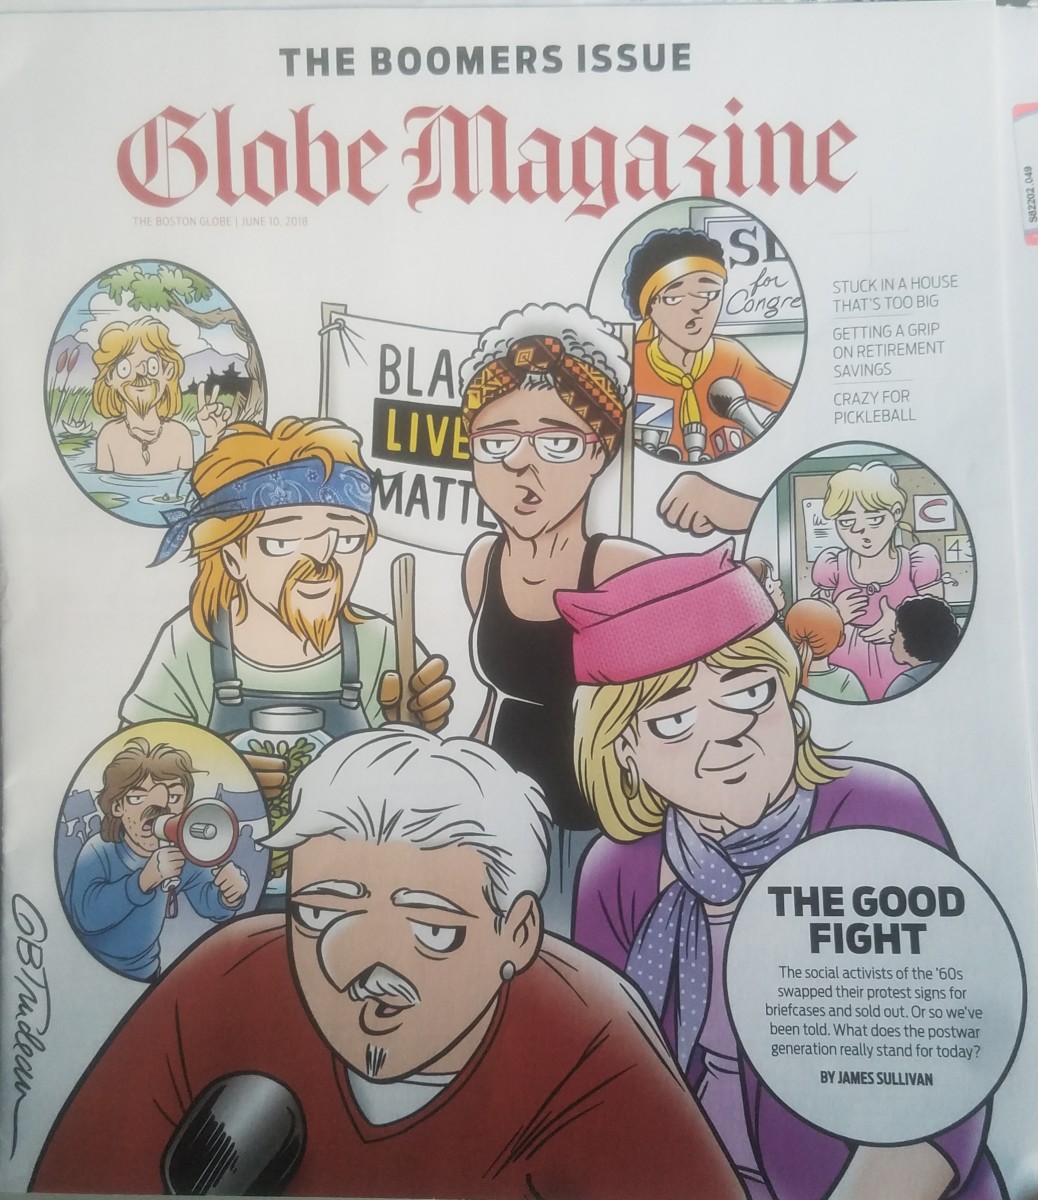 Boston Globe - The Boomer Issue by Garry Trudeau 